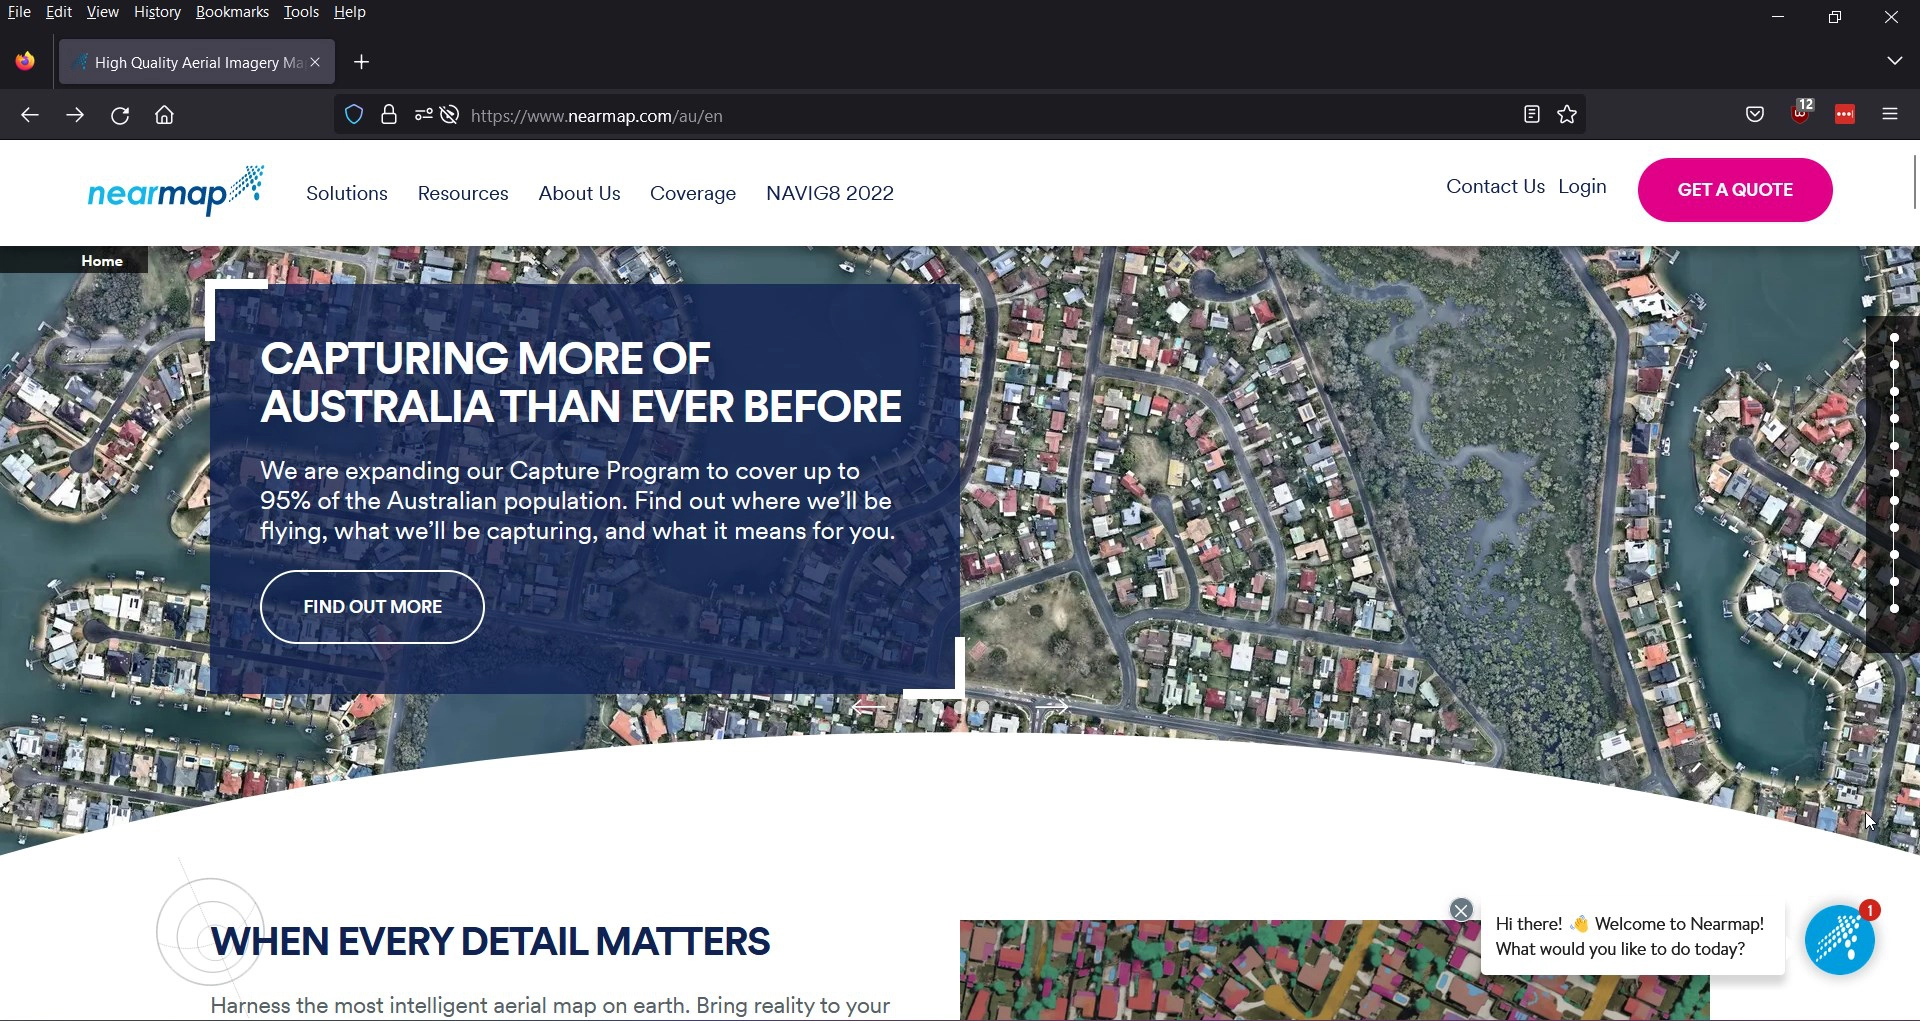 Screen capture of the Nearmap website showing the quality of images.